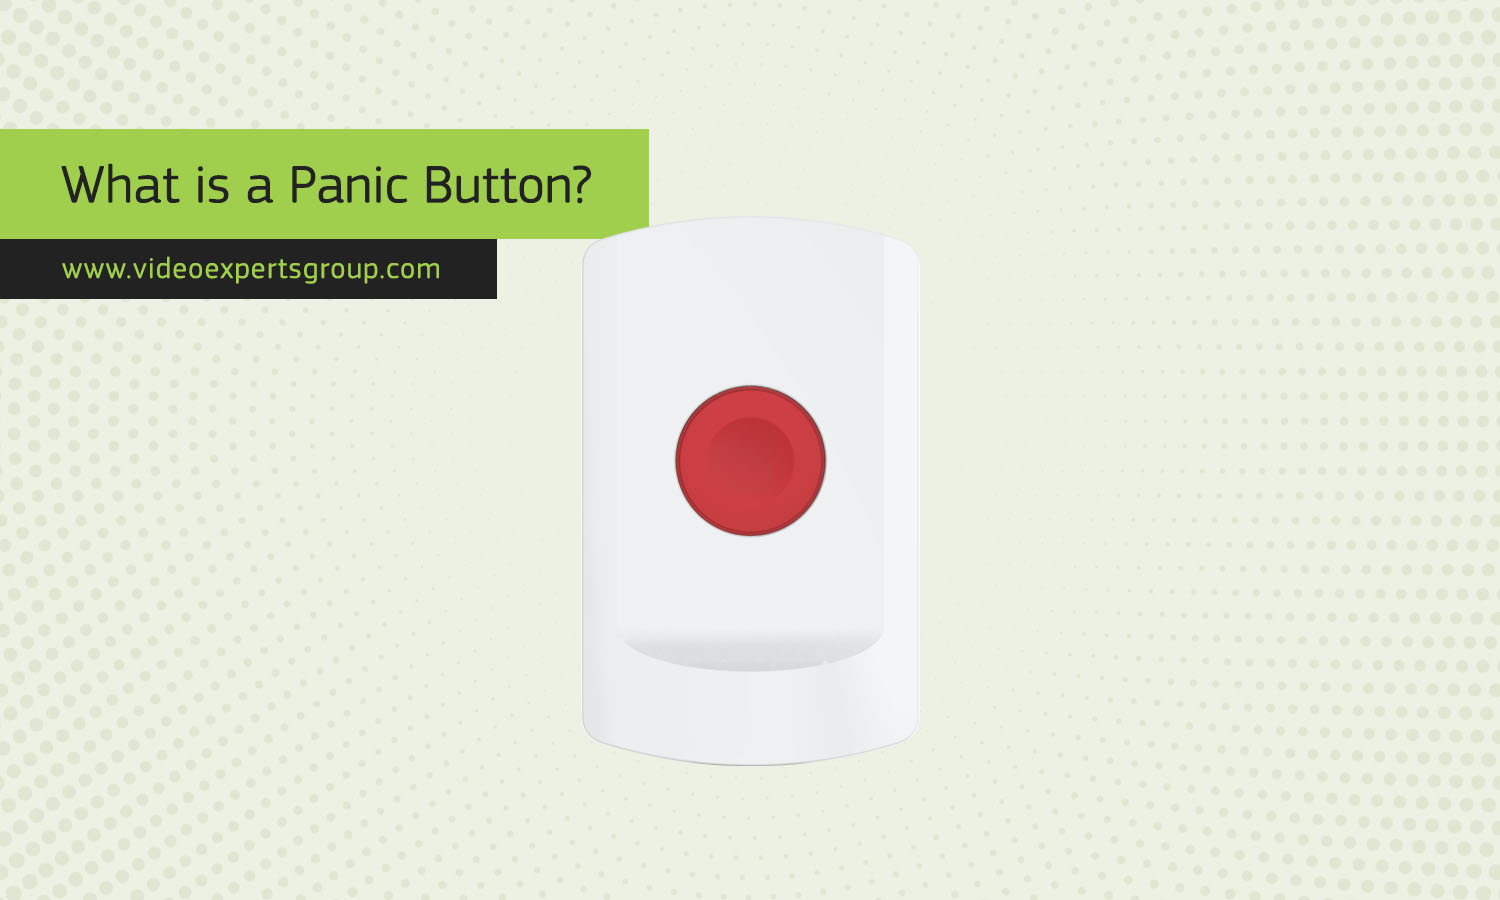 What is a Panic Button?